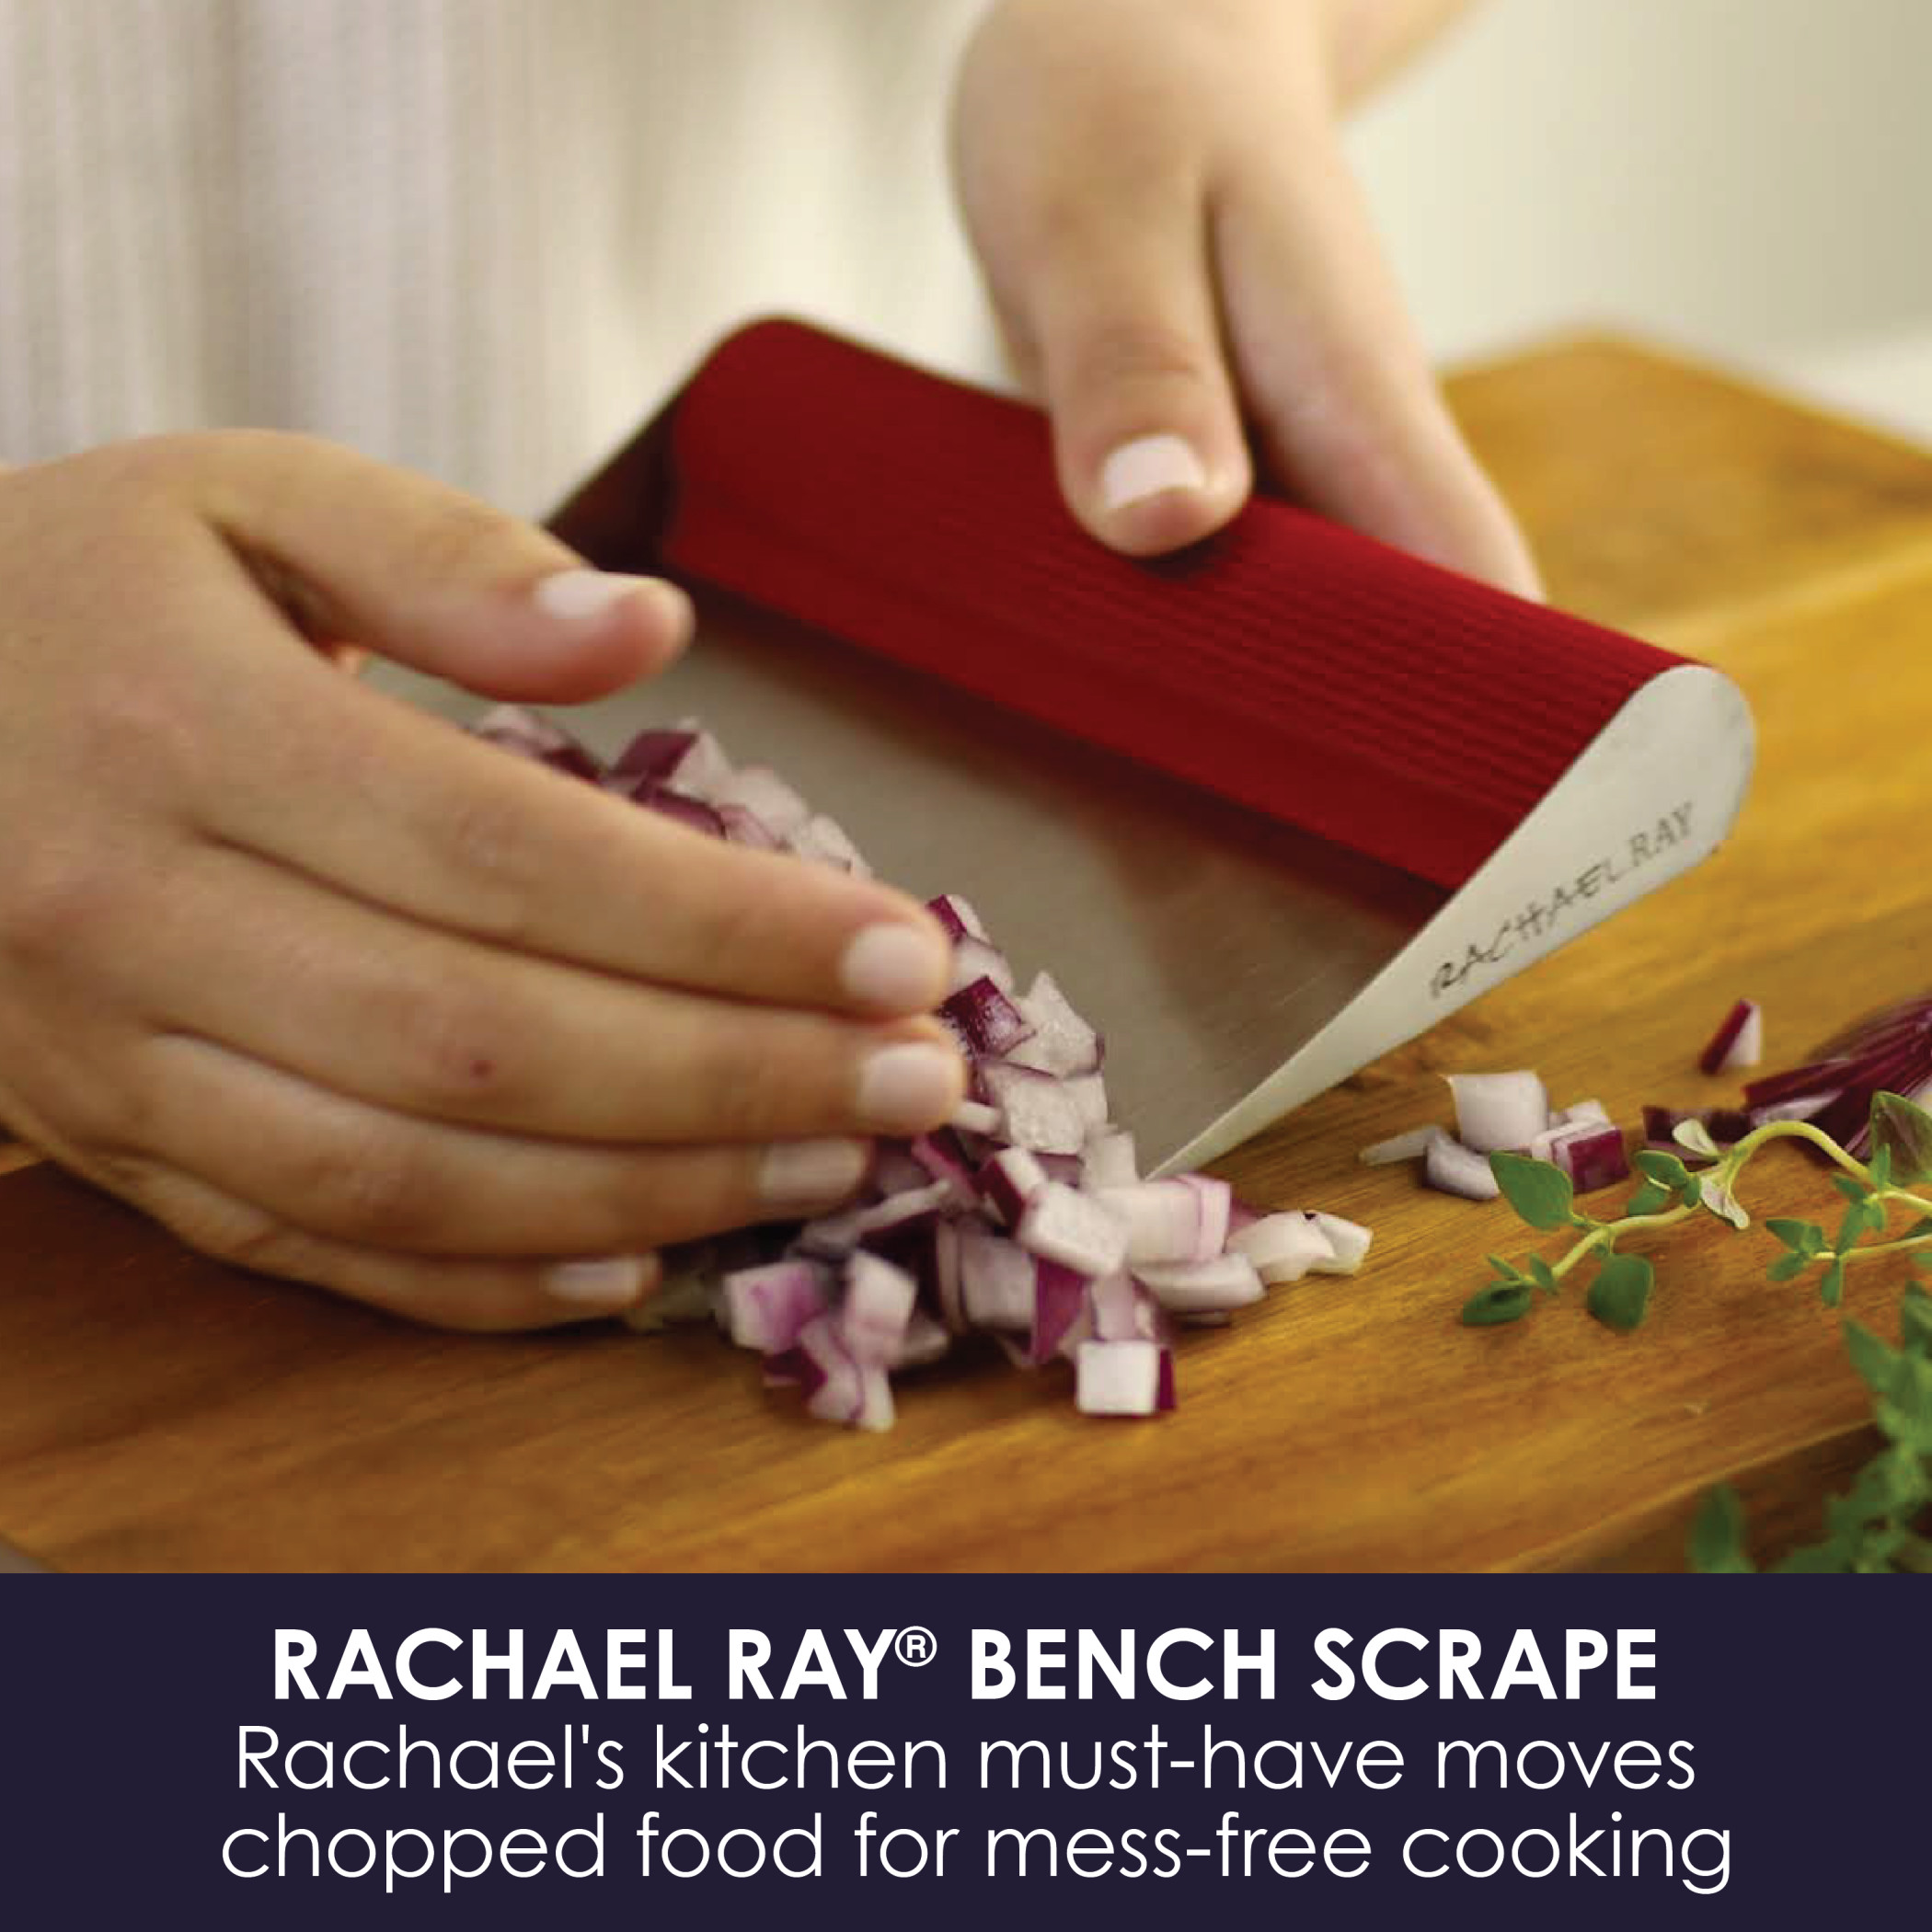 Rachael Ray Cucina Tools and Gadgets Bench Scrape, Agave Blue - image 5 of 6